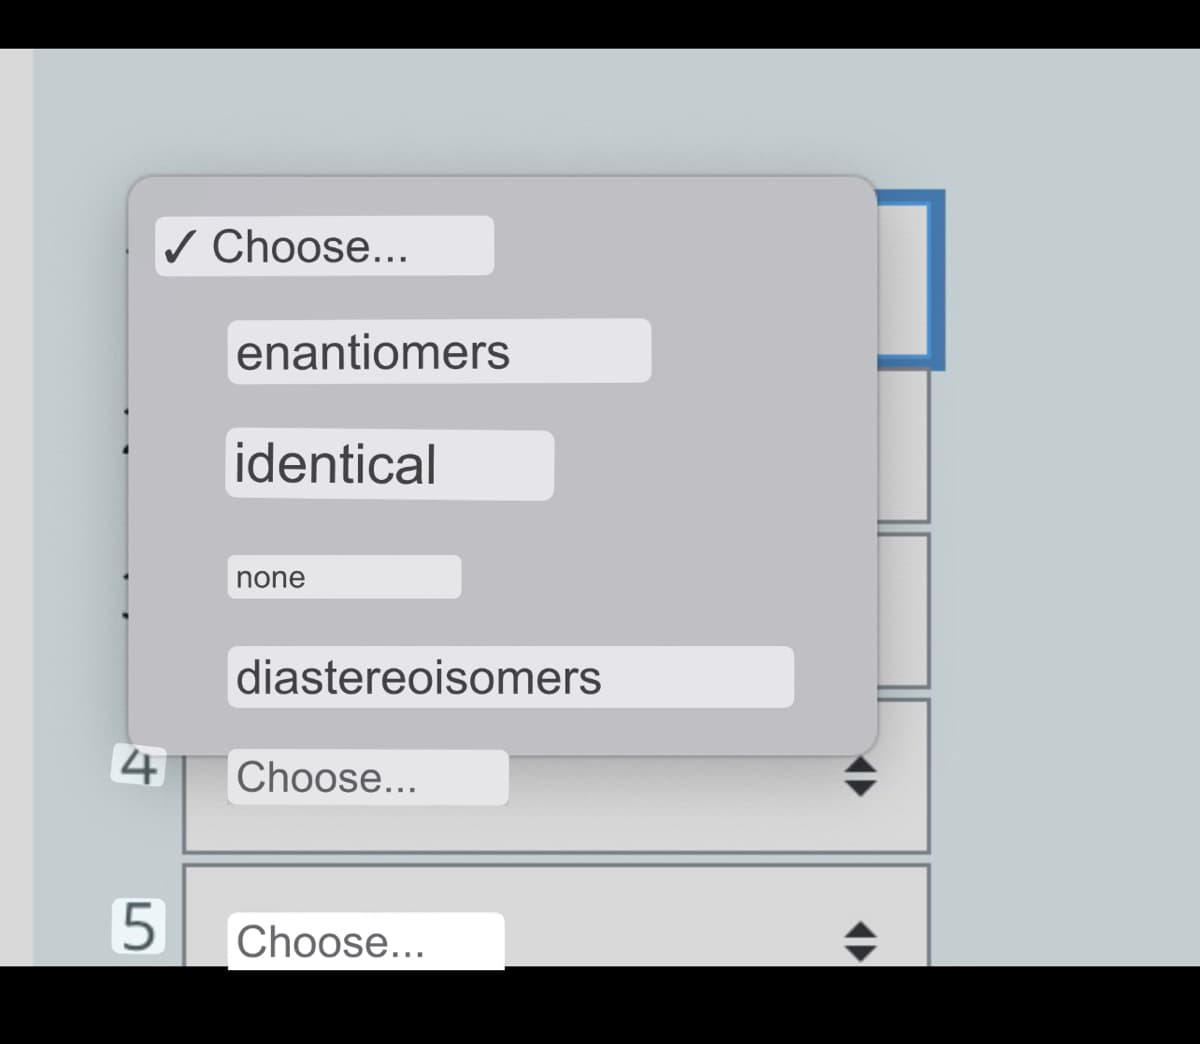 ✓ Choose...
5
enantiomers
identical
none
diastereoisomers
4 Choose...
Choose...
◆